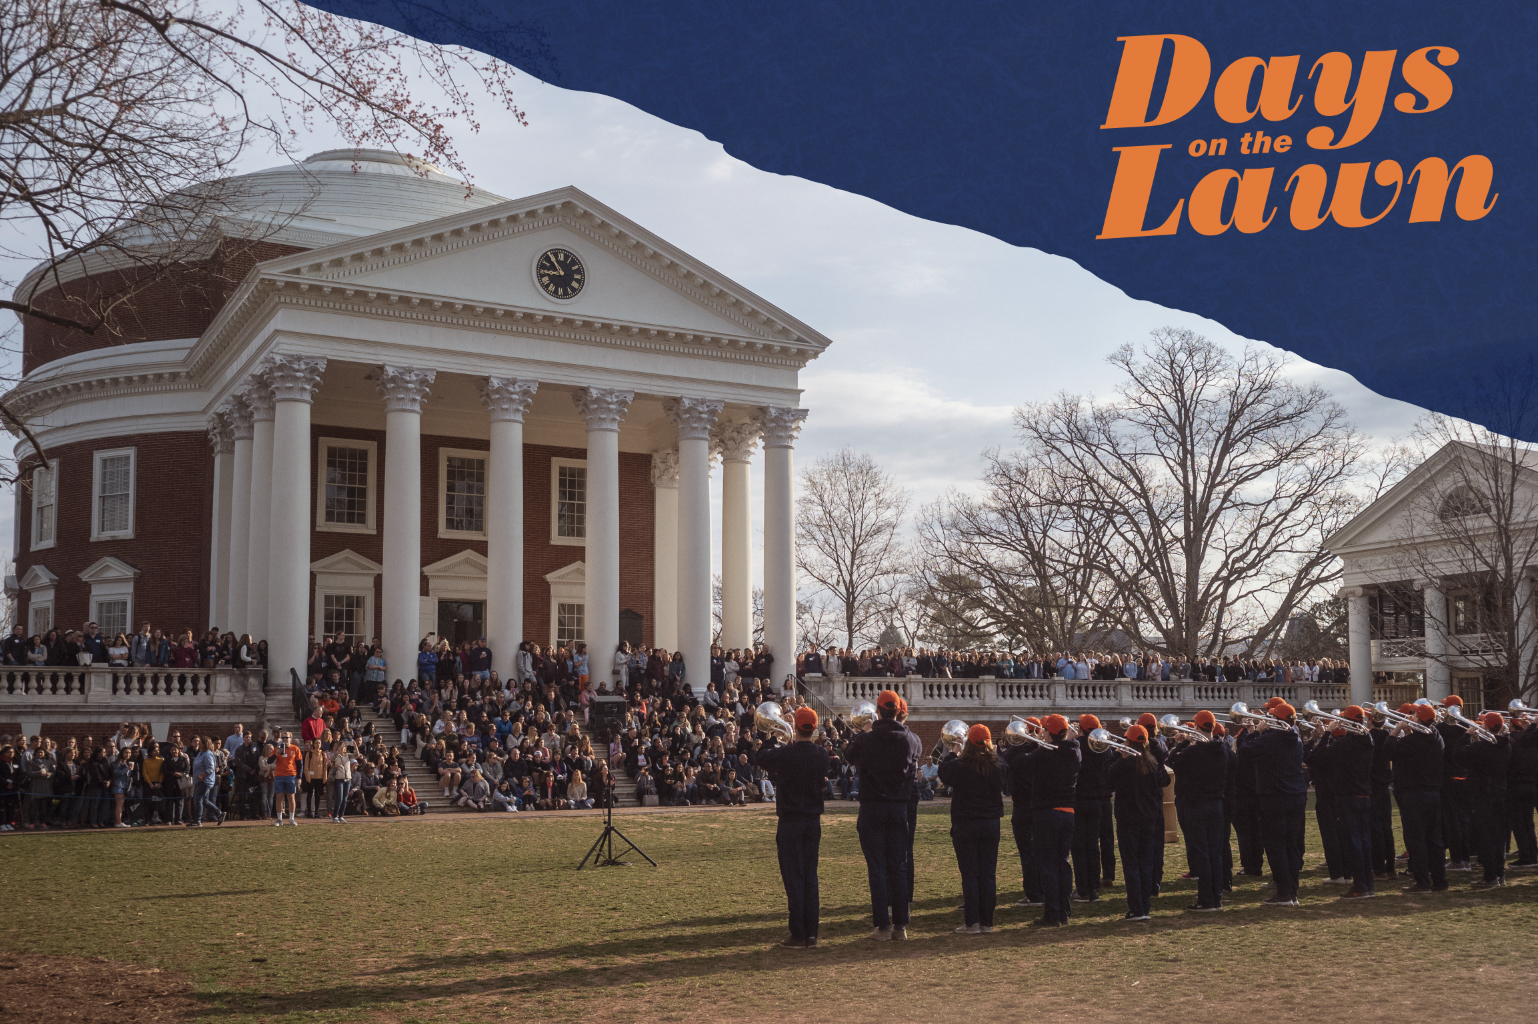 UVA Marching Band playing in front of the Rotunda; Days on the Lawn written in corner of image